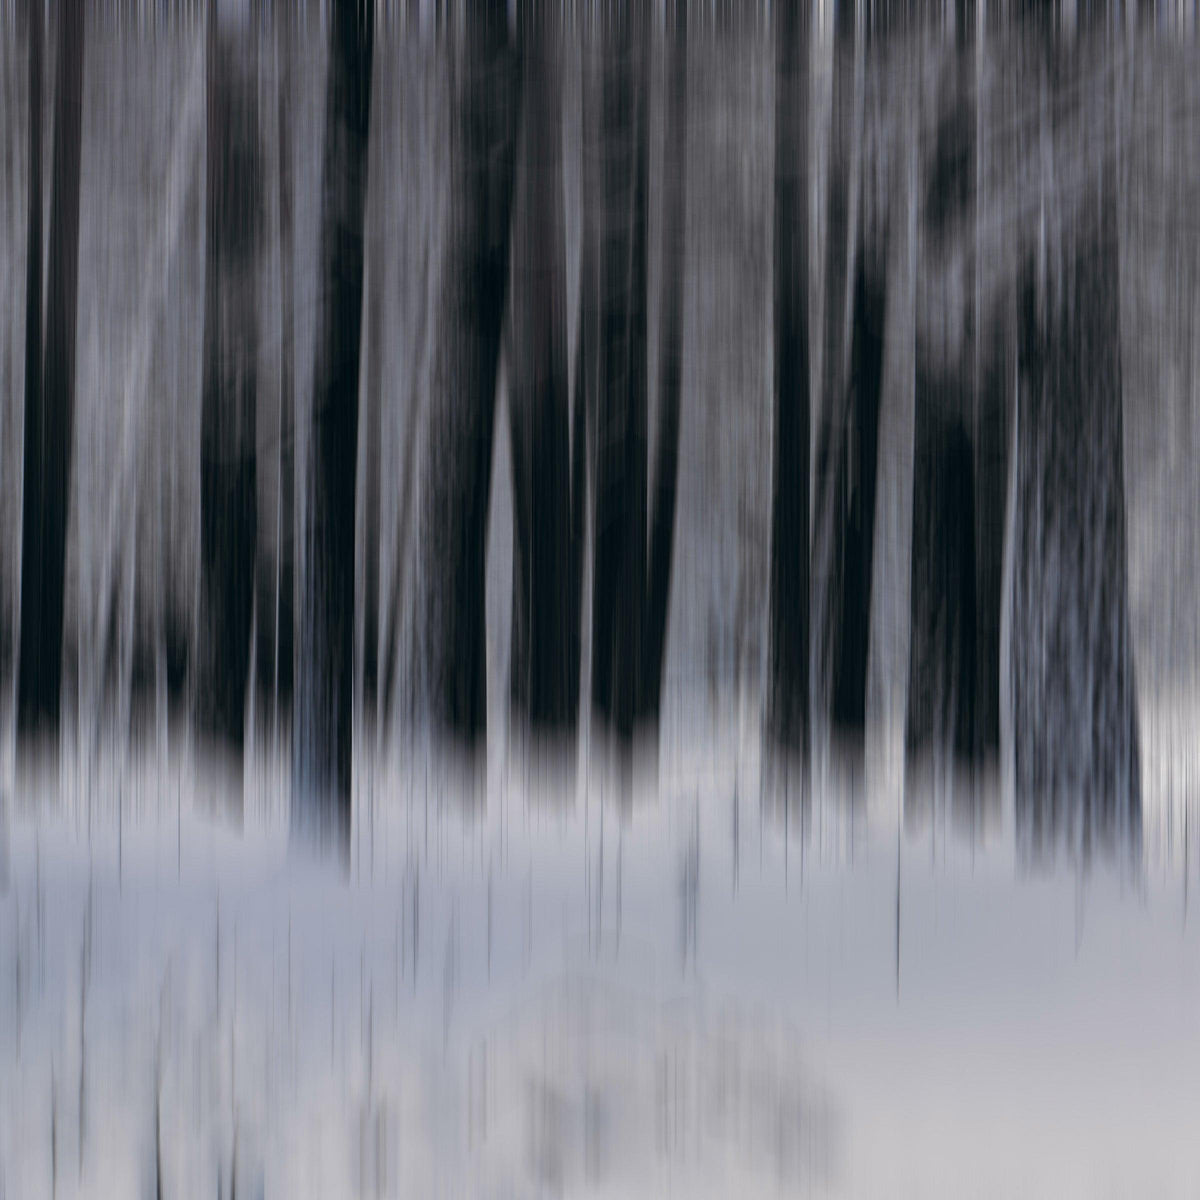 Blur II - Element Photo Pack by Peter Lik